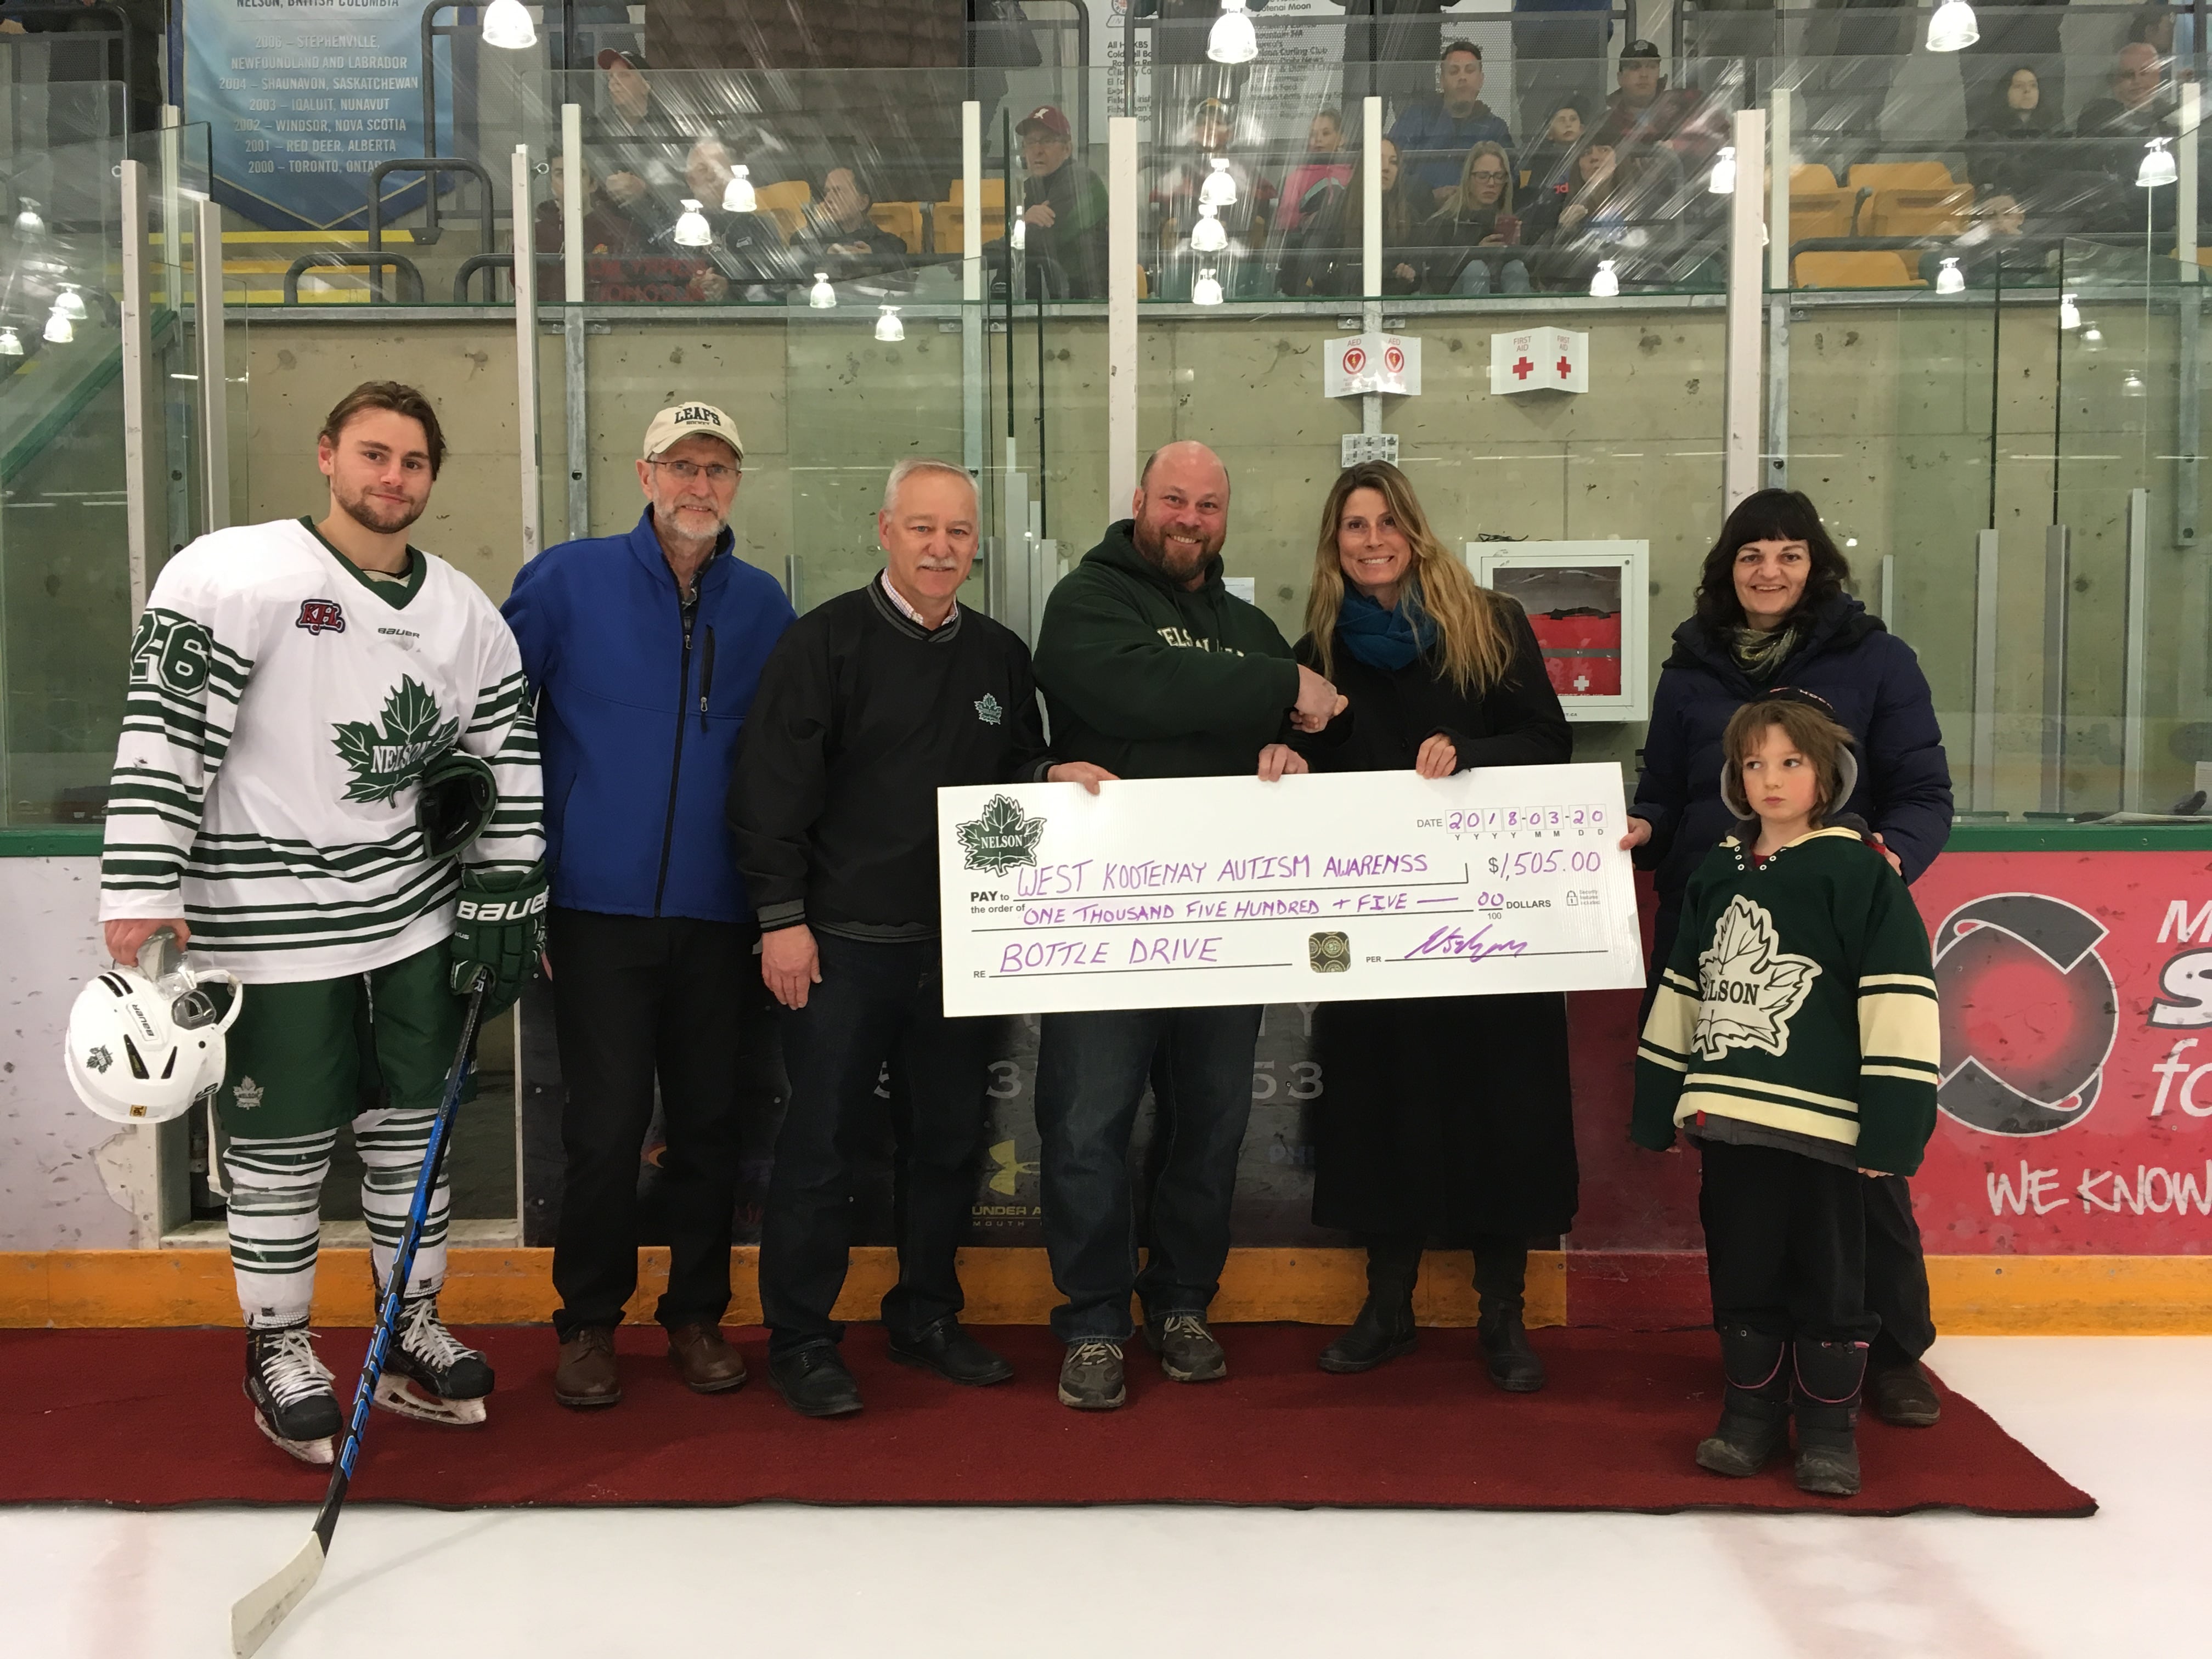 Nelson Leafs continue to support West Kootenay Autism Awareness